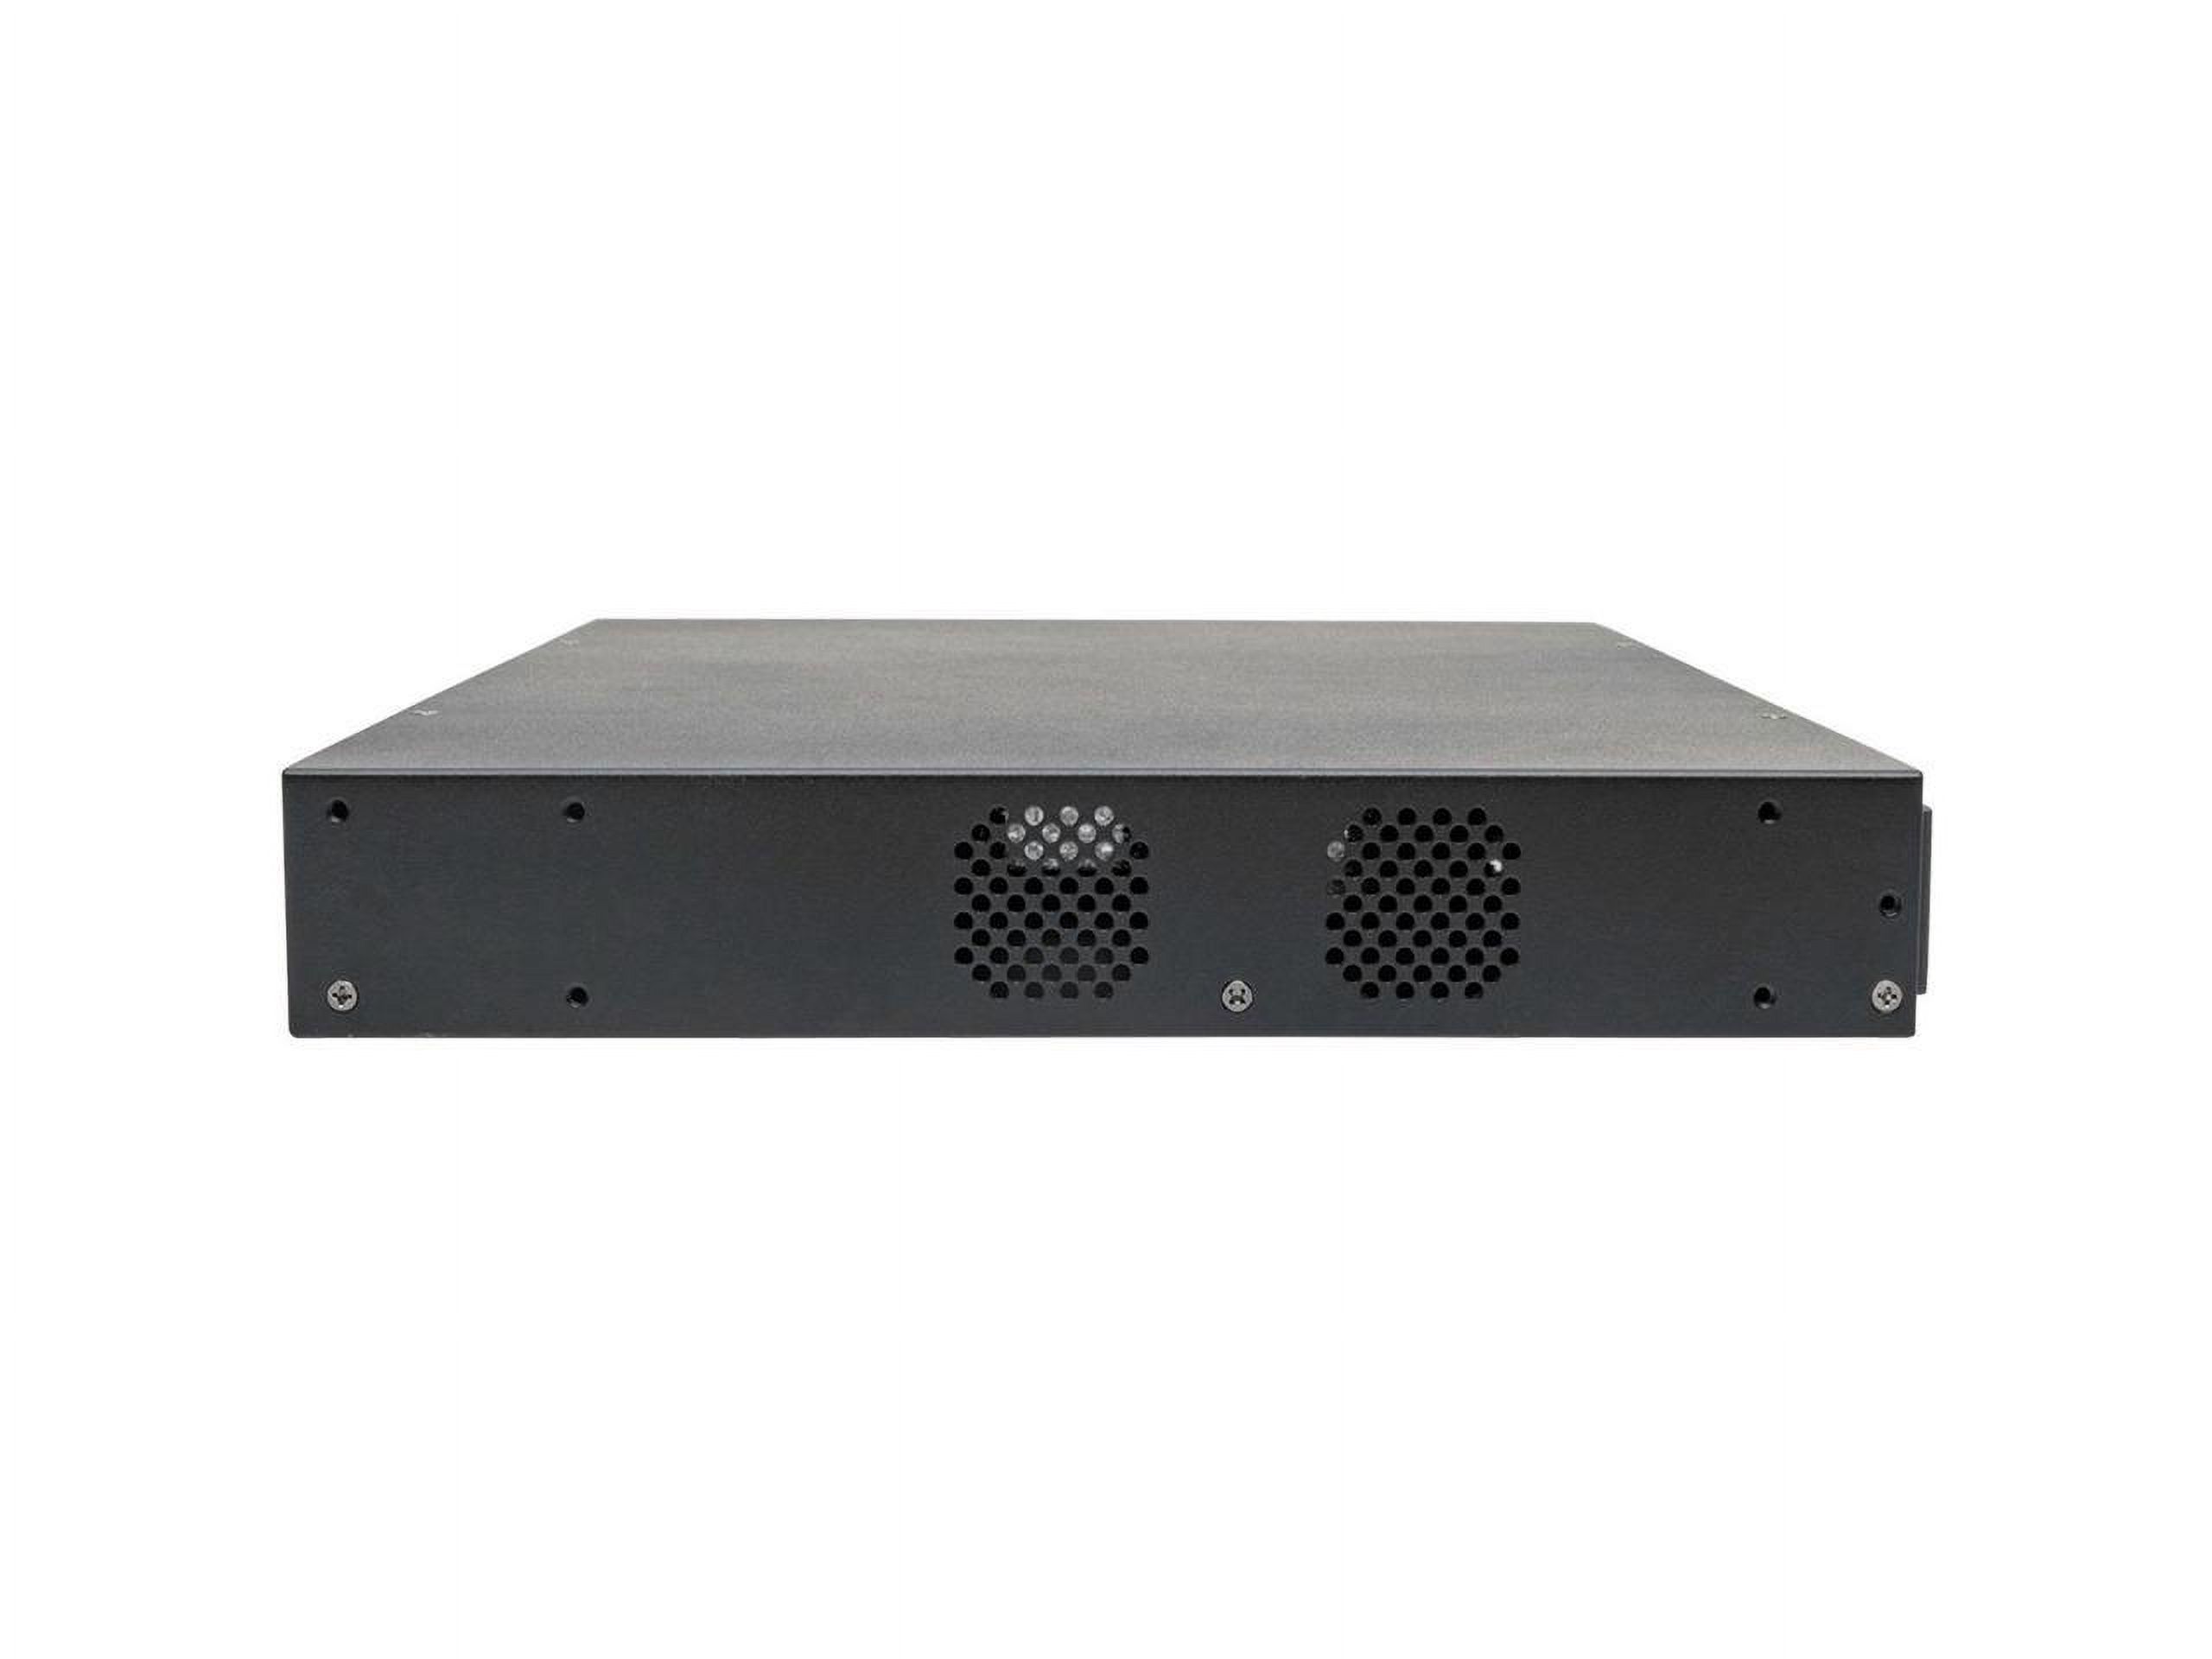 Tripp Lite 16-Port Cat5 KVM over IP Switch with Virtual Media - 1 Local & 1 Remote User, 1U Rack-Mount, TAA - KVM switch - 16 x KVM port(s) - 1 local user - 2 IP users - rack-mountable - government GSA - TAA Compliant - image 3 of 5